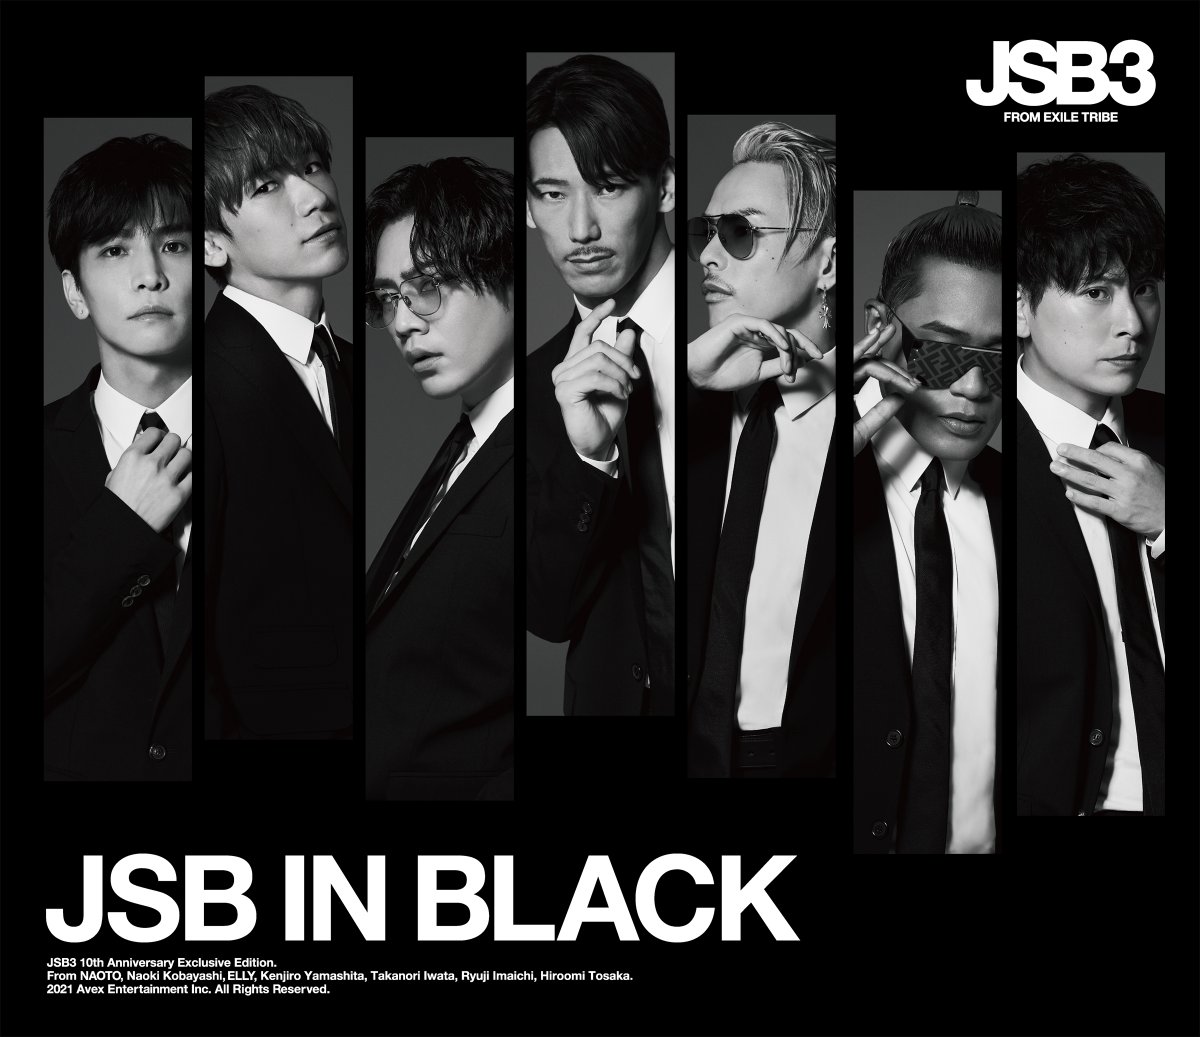 Idol Multifan J Pop Jsoulbrothers Iii From Exile Tribe Has Released Individual Artists Photos Of Elly Kenjiroyamashita For Their Upcoming Single Jsb In Black Which Is Scheduled To Be Released On